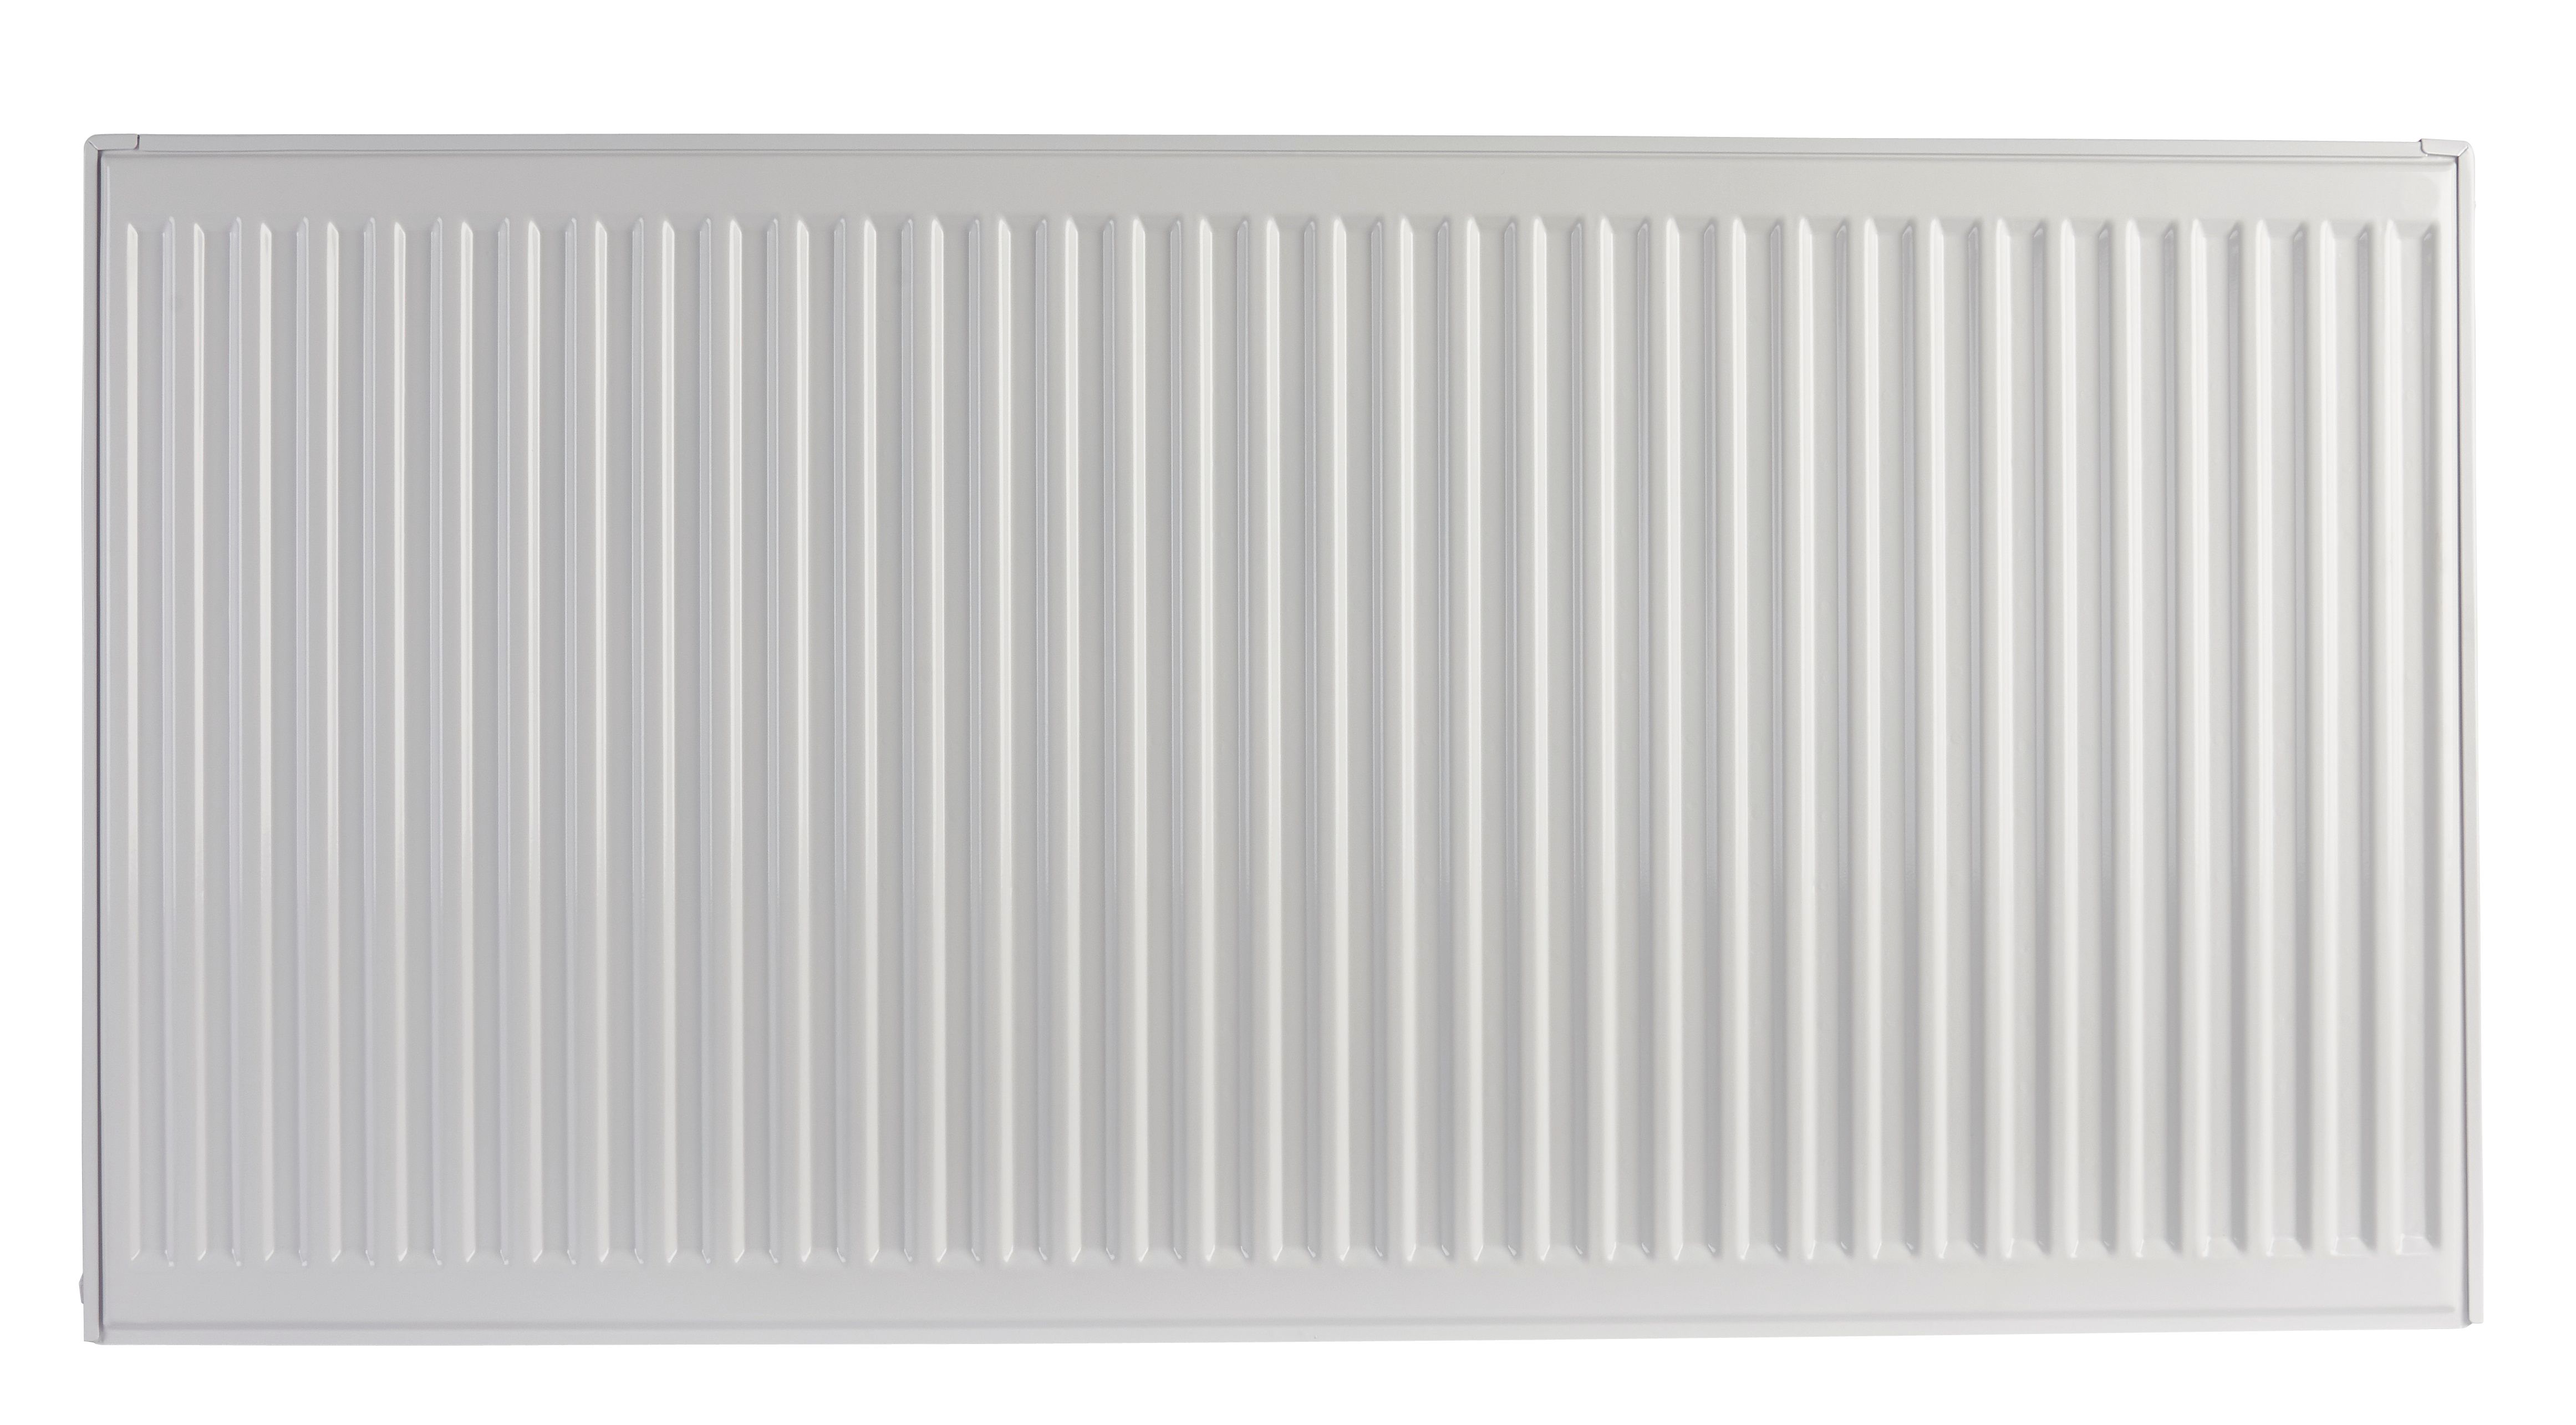 Image of Homeline by Stelrad 600 x 1100mm Type 11 Single Panel Single Convector Radiator